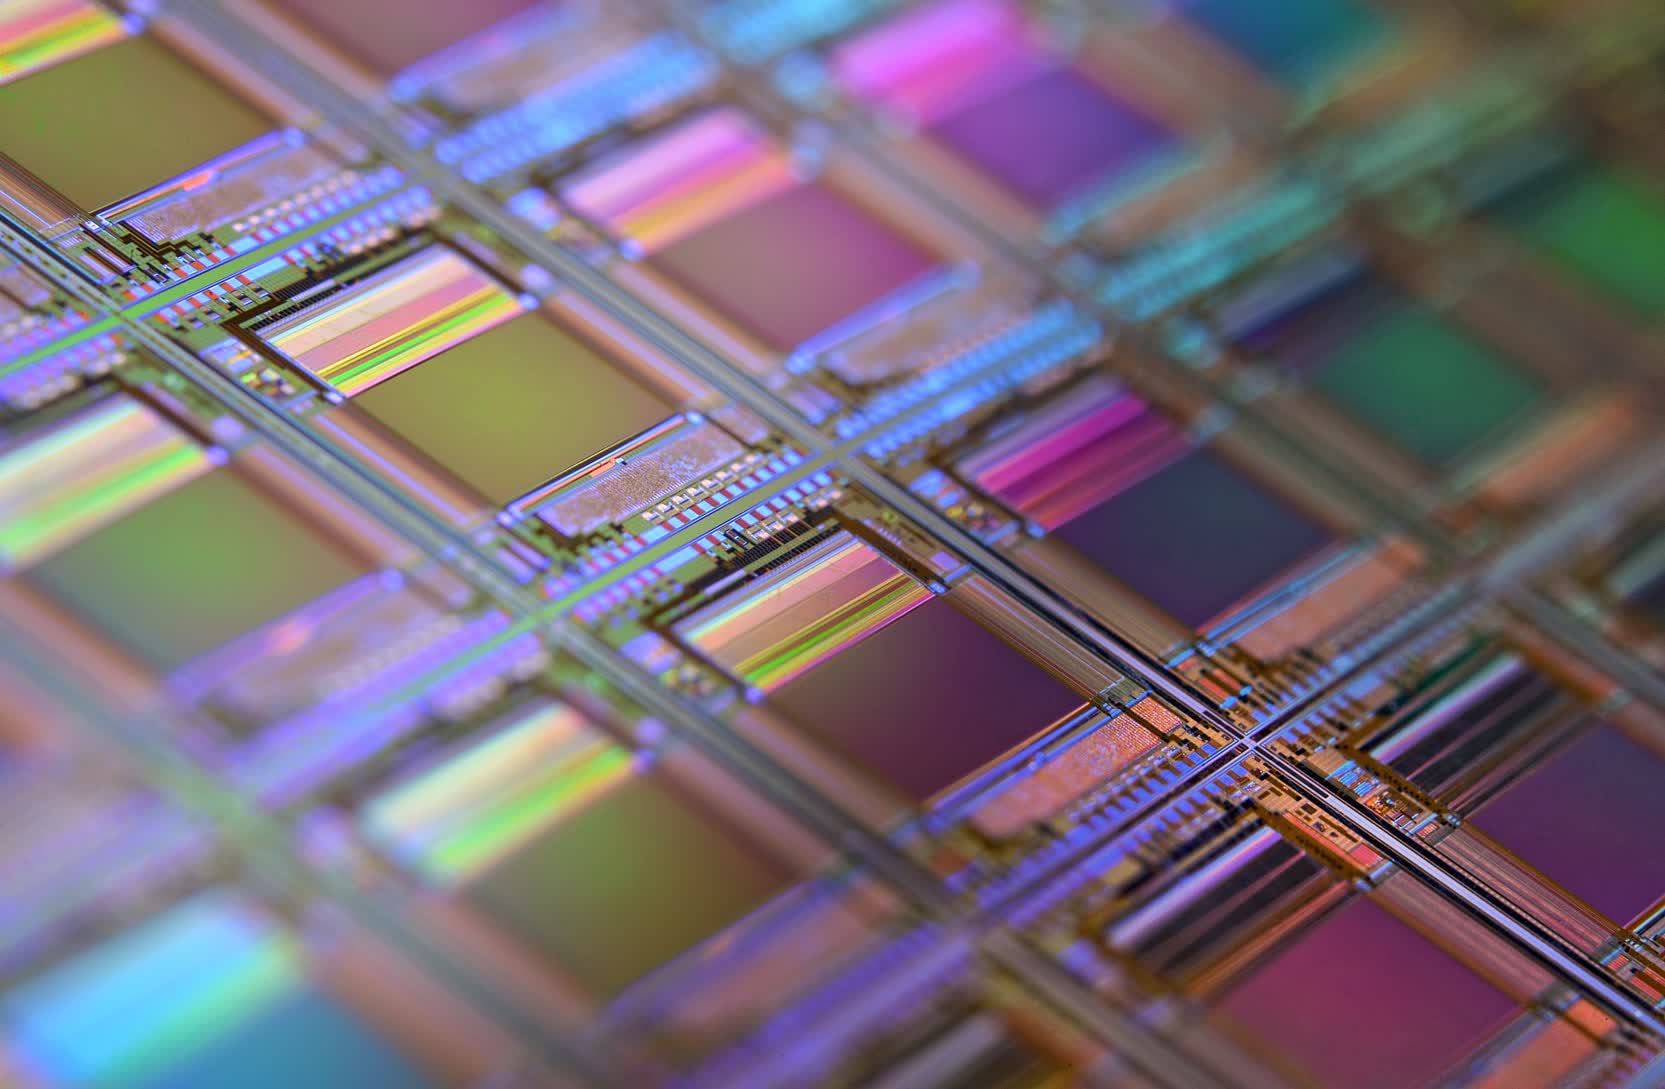 TSMC price hike expected to impact CPUs and graphics cards this year